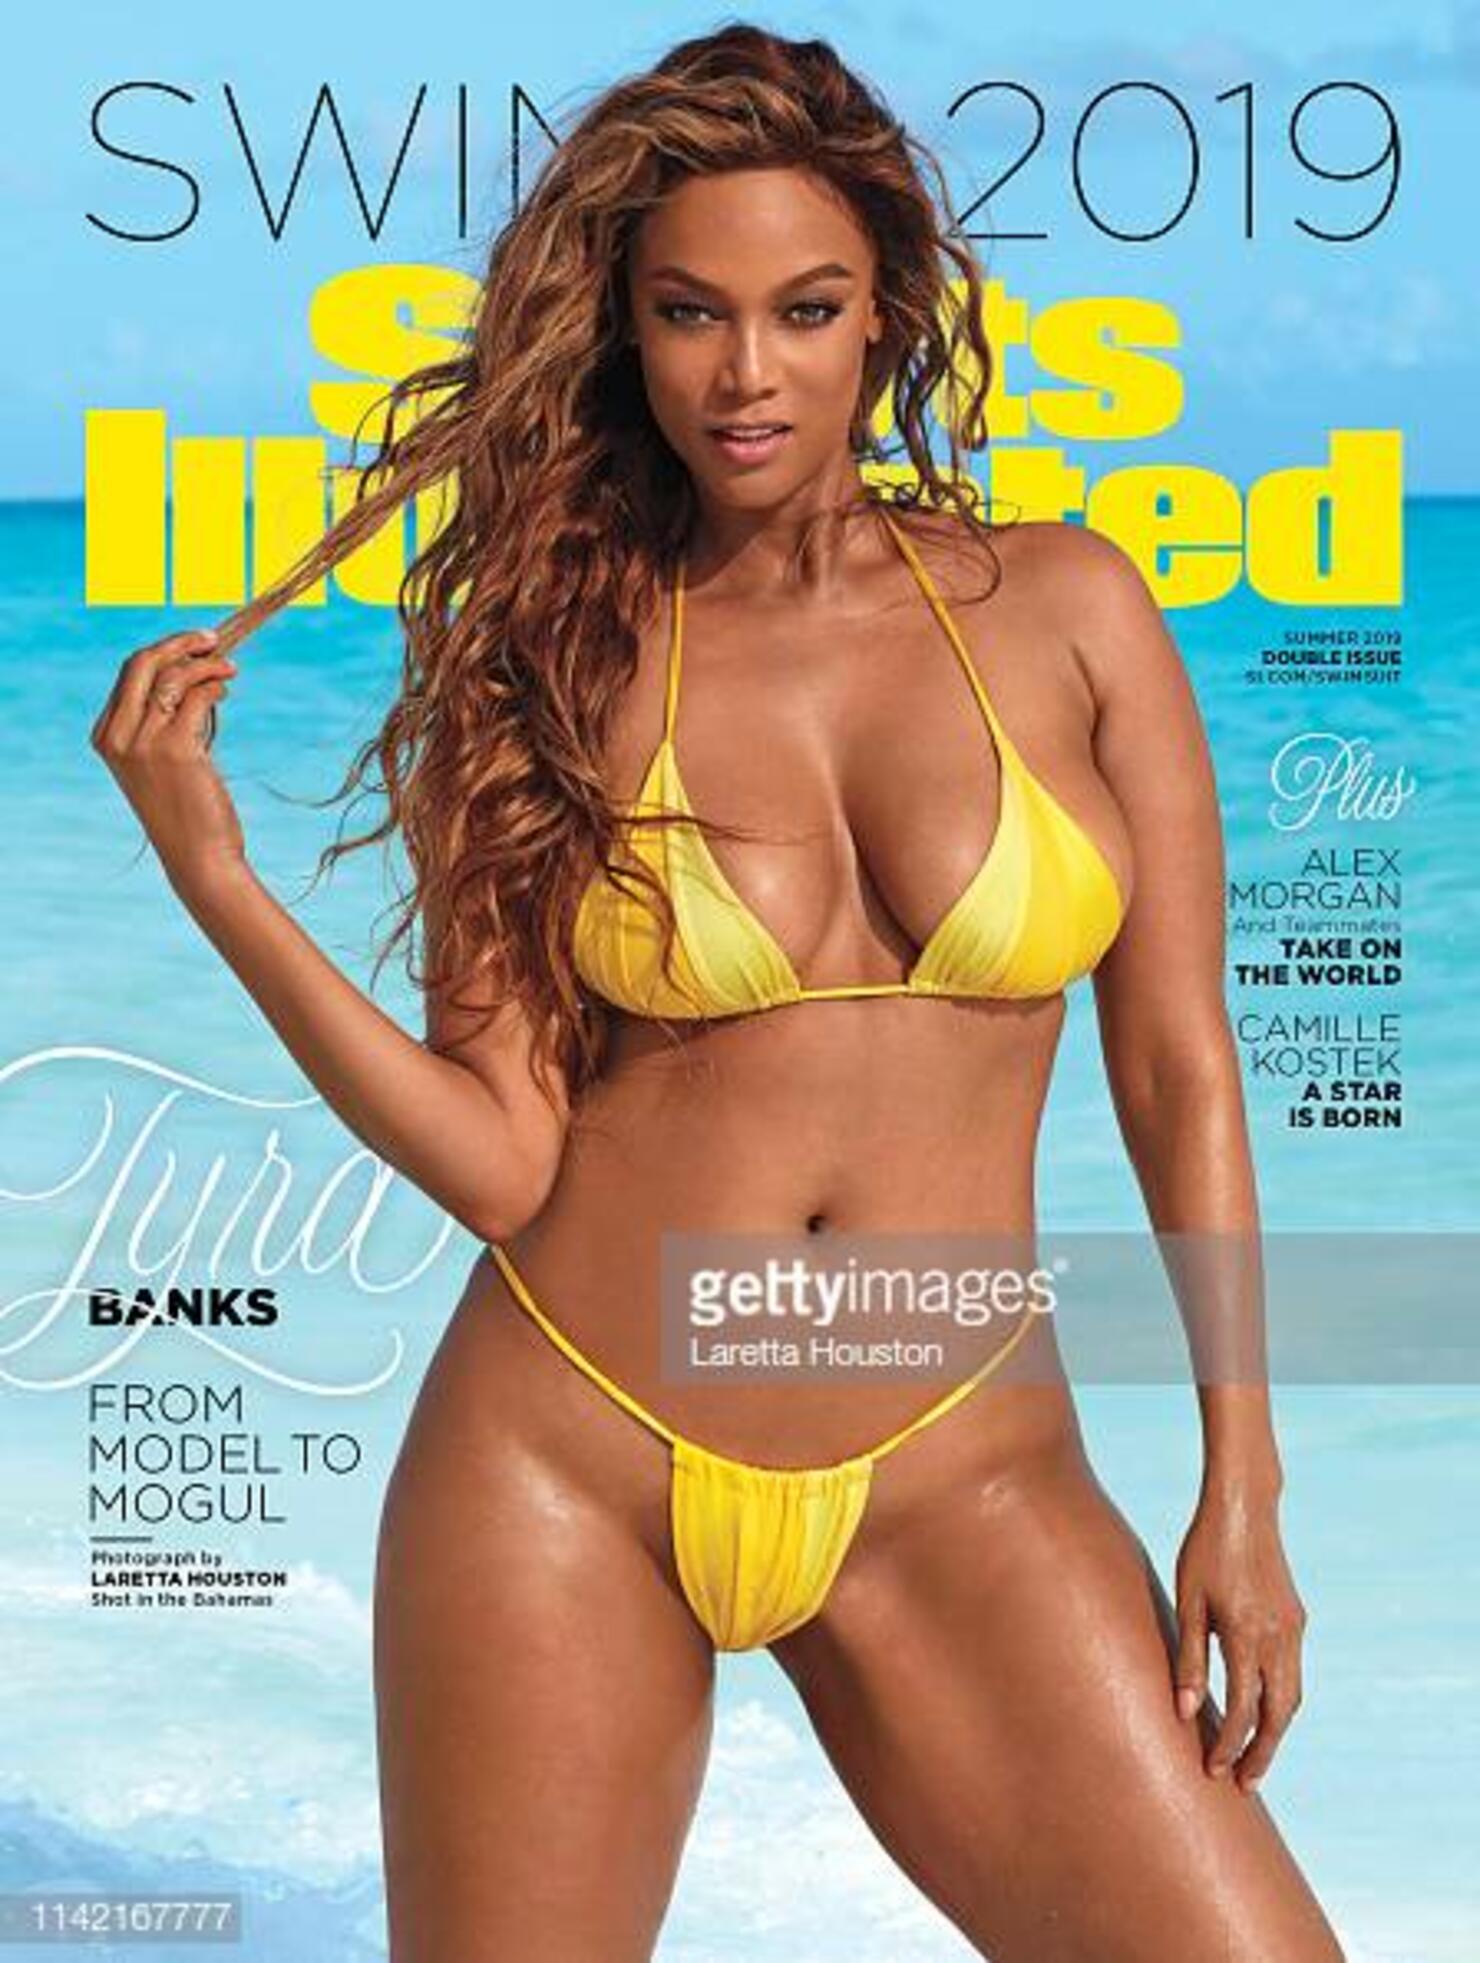 56 Year Old Mom Kathy Jacobs Is A New Sports Illustrated Swimsuit Model